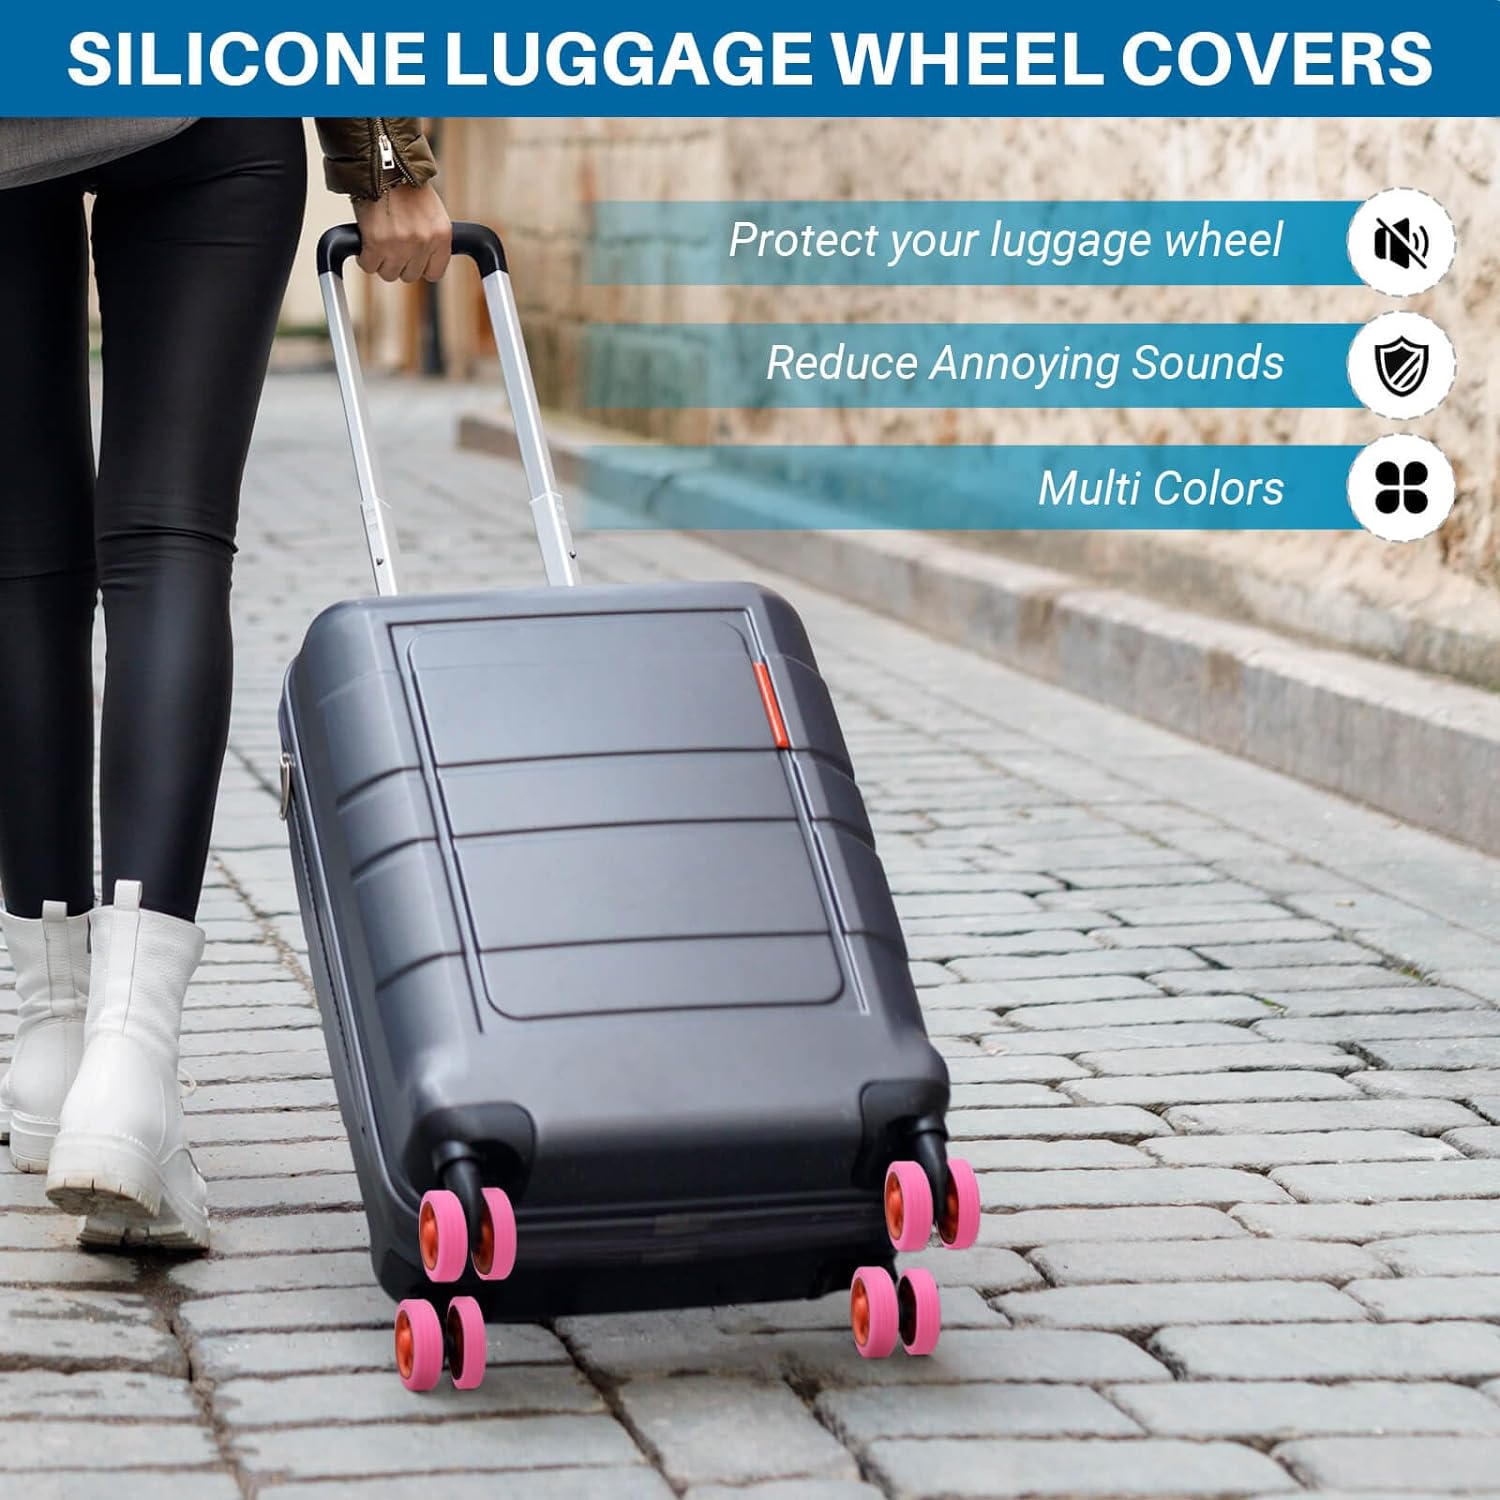 Buy 1 4-Pack, Get 1 Extra Free💥WheelGuard Luggage Cover - Protection for Travel Bag Wheels